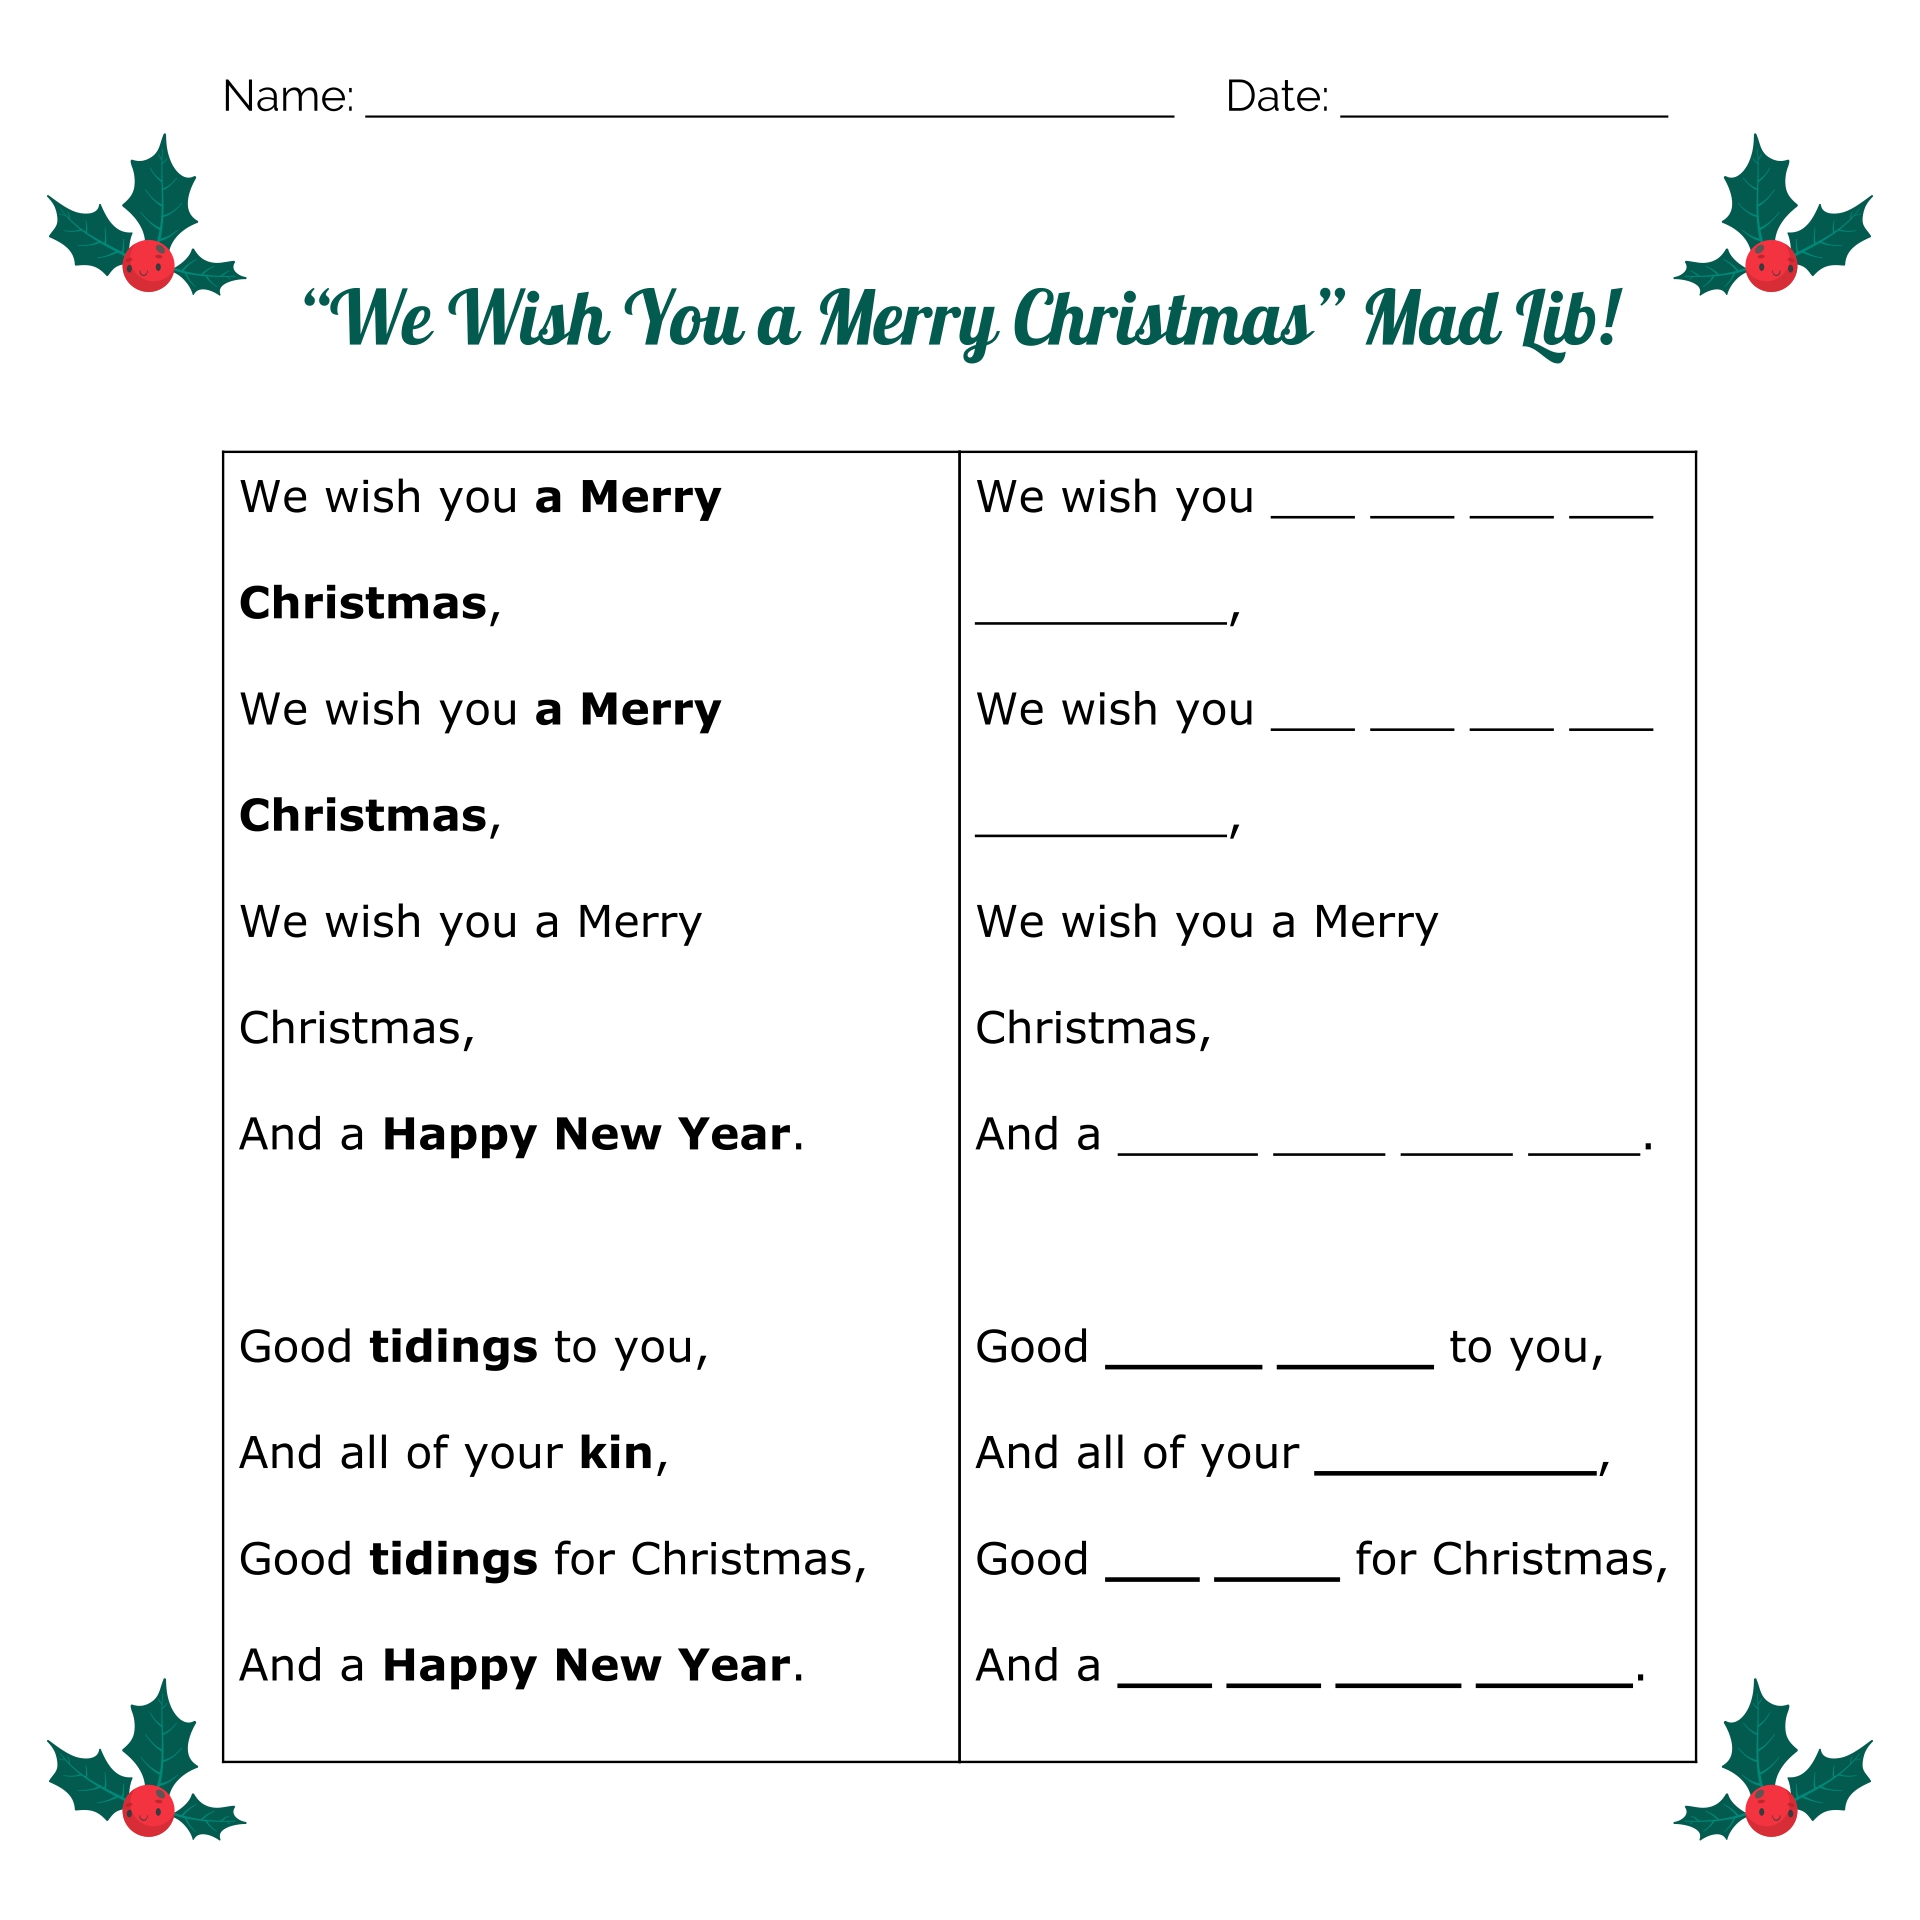 Christmas Printable Images Gallery Category Page 20